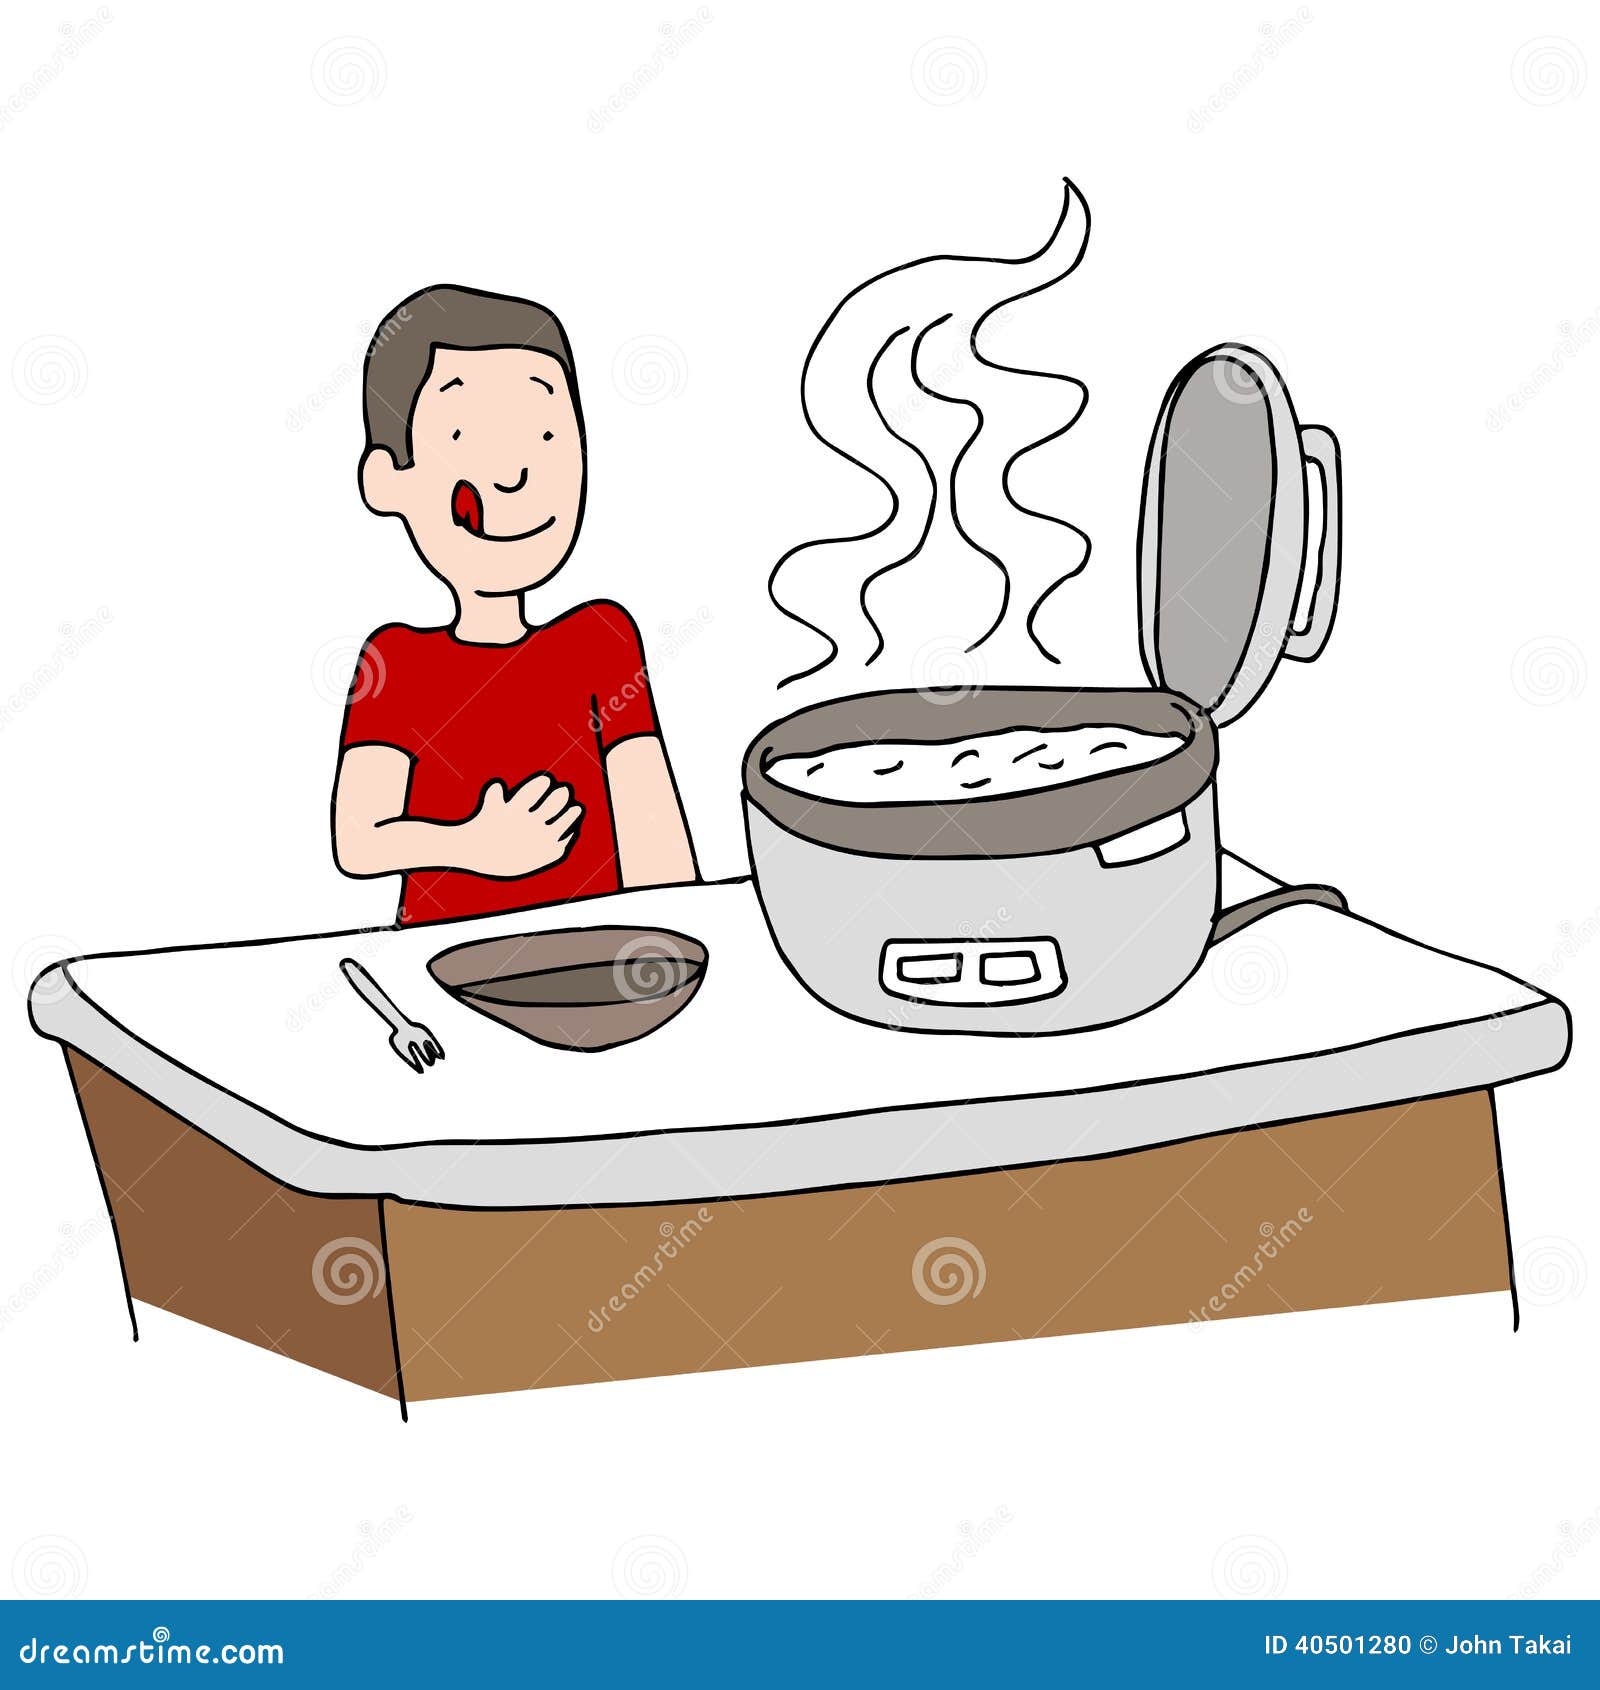 Cooker Cartoons, Illustrations & Vector Stock Images - 36162 Pictures